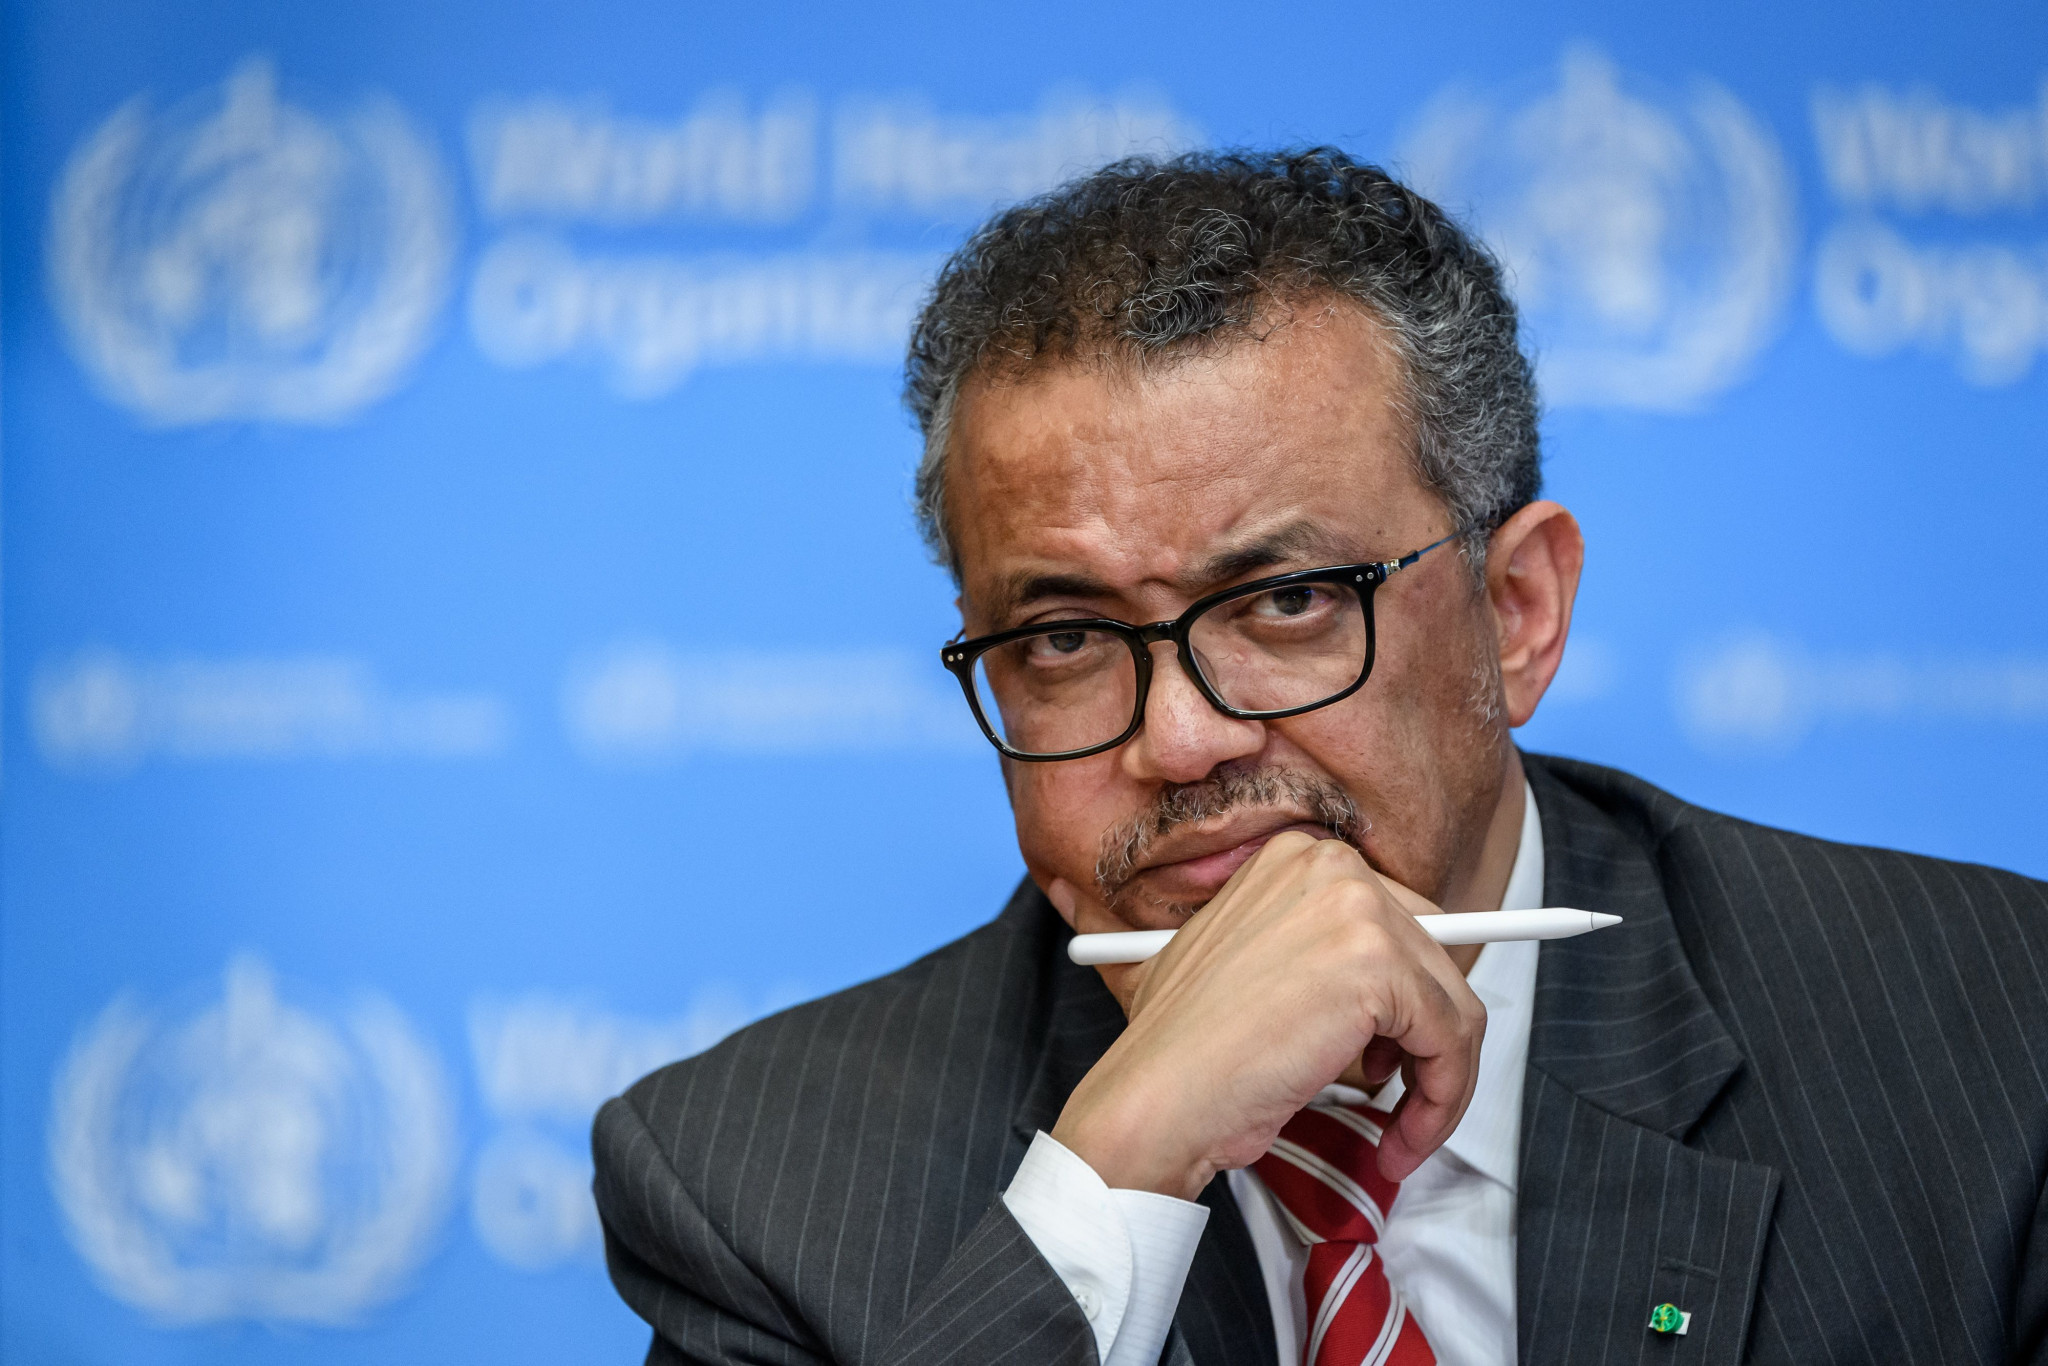 WHO director general Tedros Ghebreyesus pledged his support to the successful staging of the Tokyo 2020 Olympic and Paralympic Games ©Getty Images